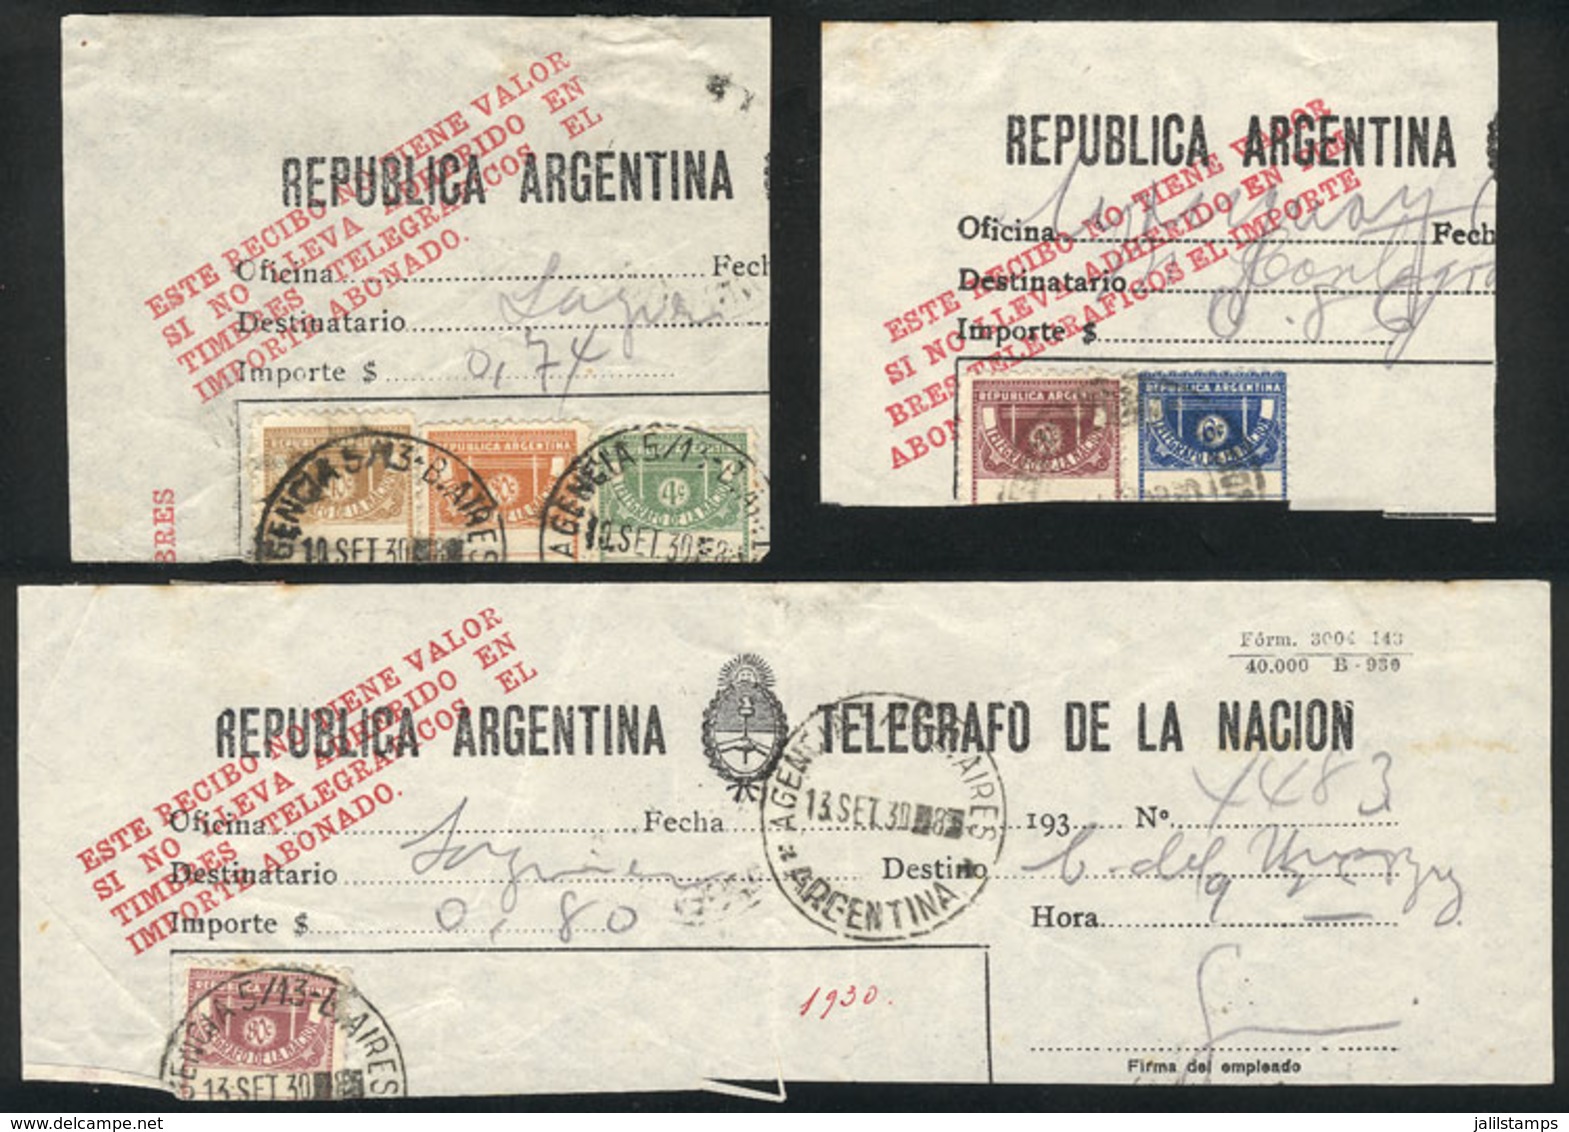 ARGENTINA: 3 Fragments Of Telegram Receipts Of The Year 1930, With Affixed Stamps (the Part Corresponding To The Client) - Telegraphenmarken